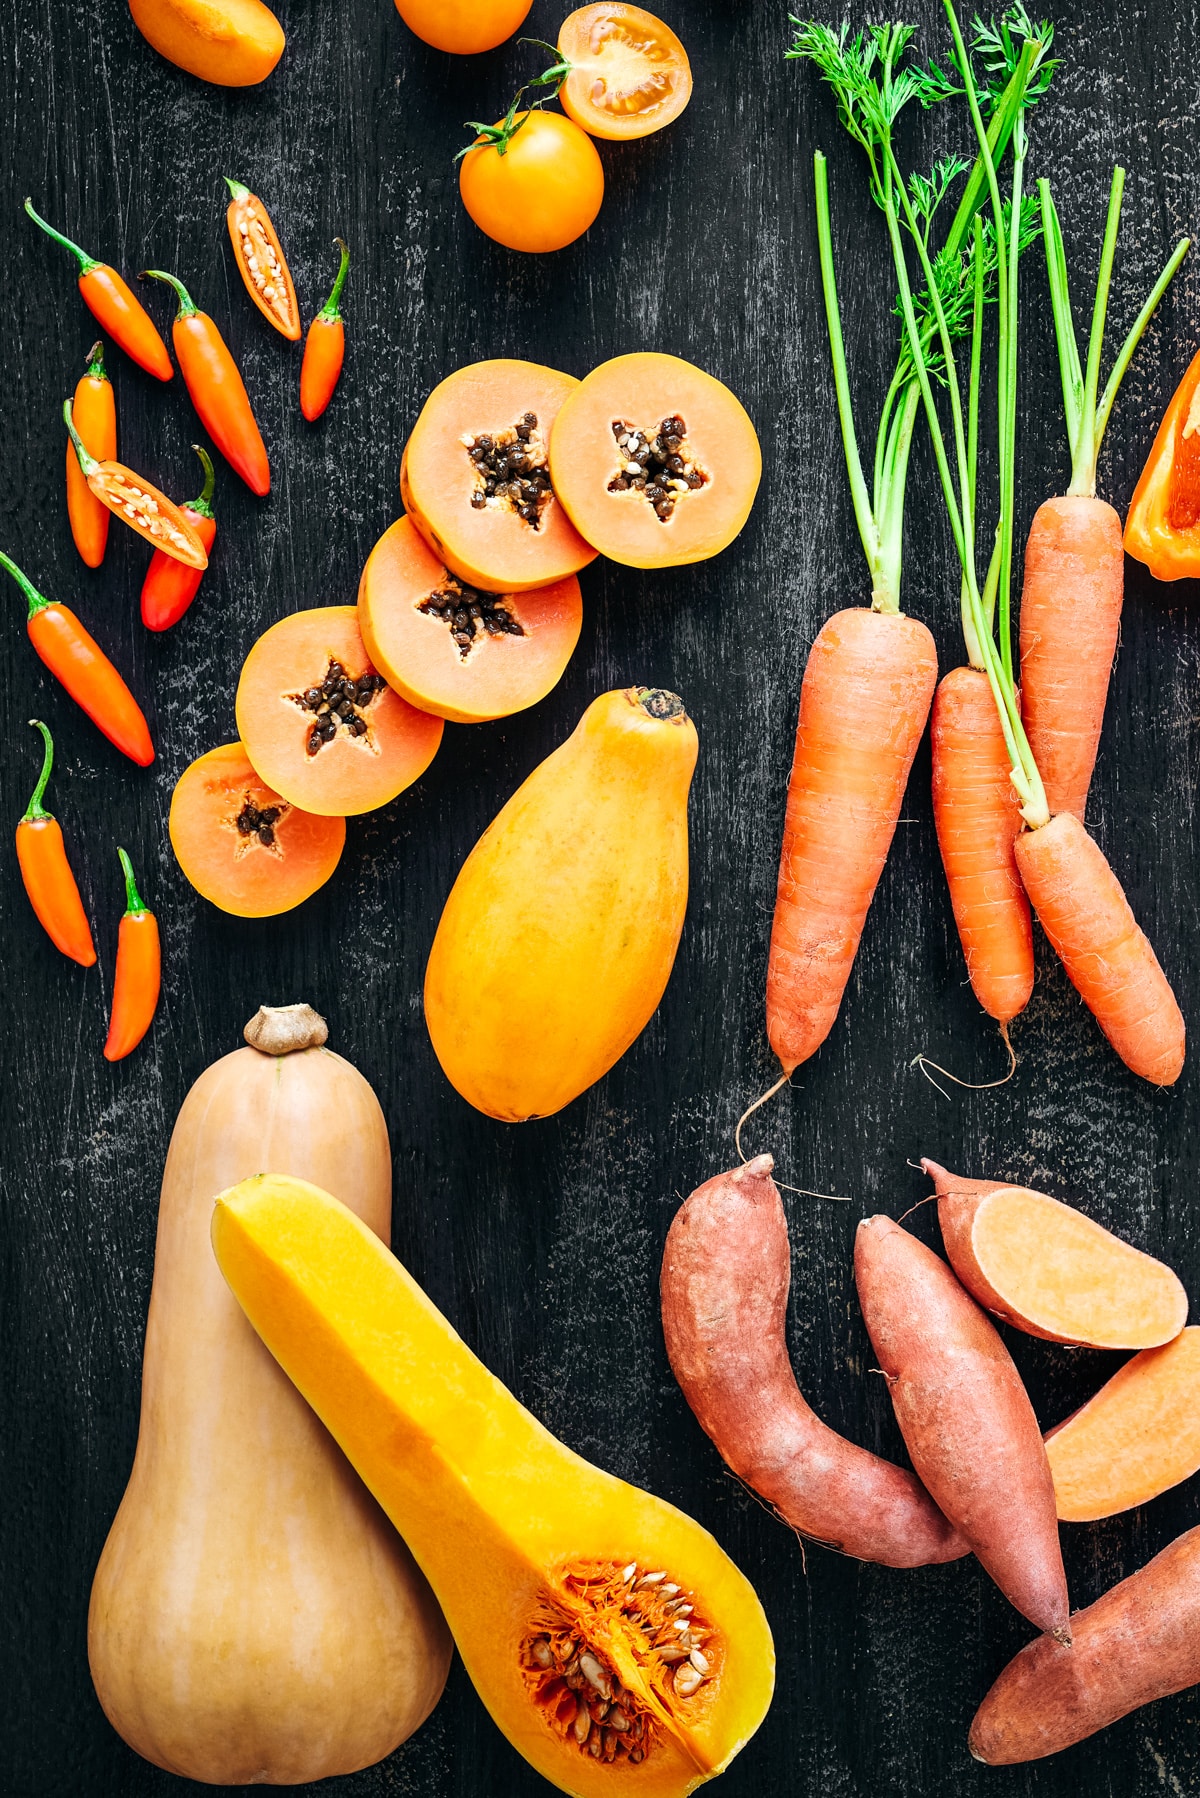 Butternut squash, carrots, persimmon, sweet potato, and orange peppers on a black backdrop.